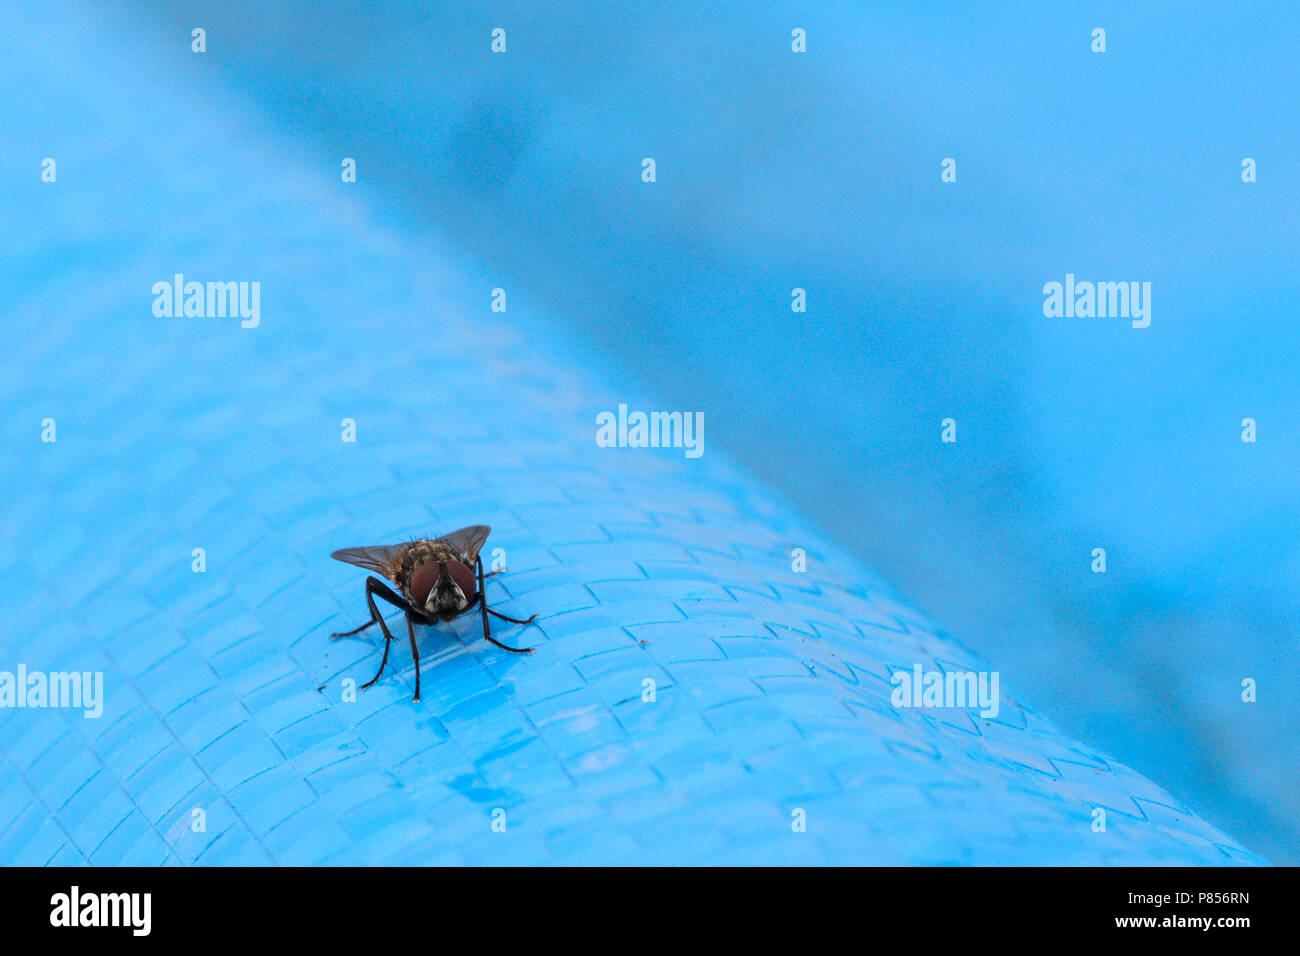 Common fly, urban disease vector pest. Musca Domestica belongs to the Muscidae family. House fly on blue background. Stock Photo